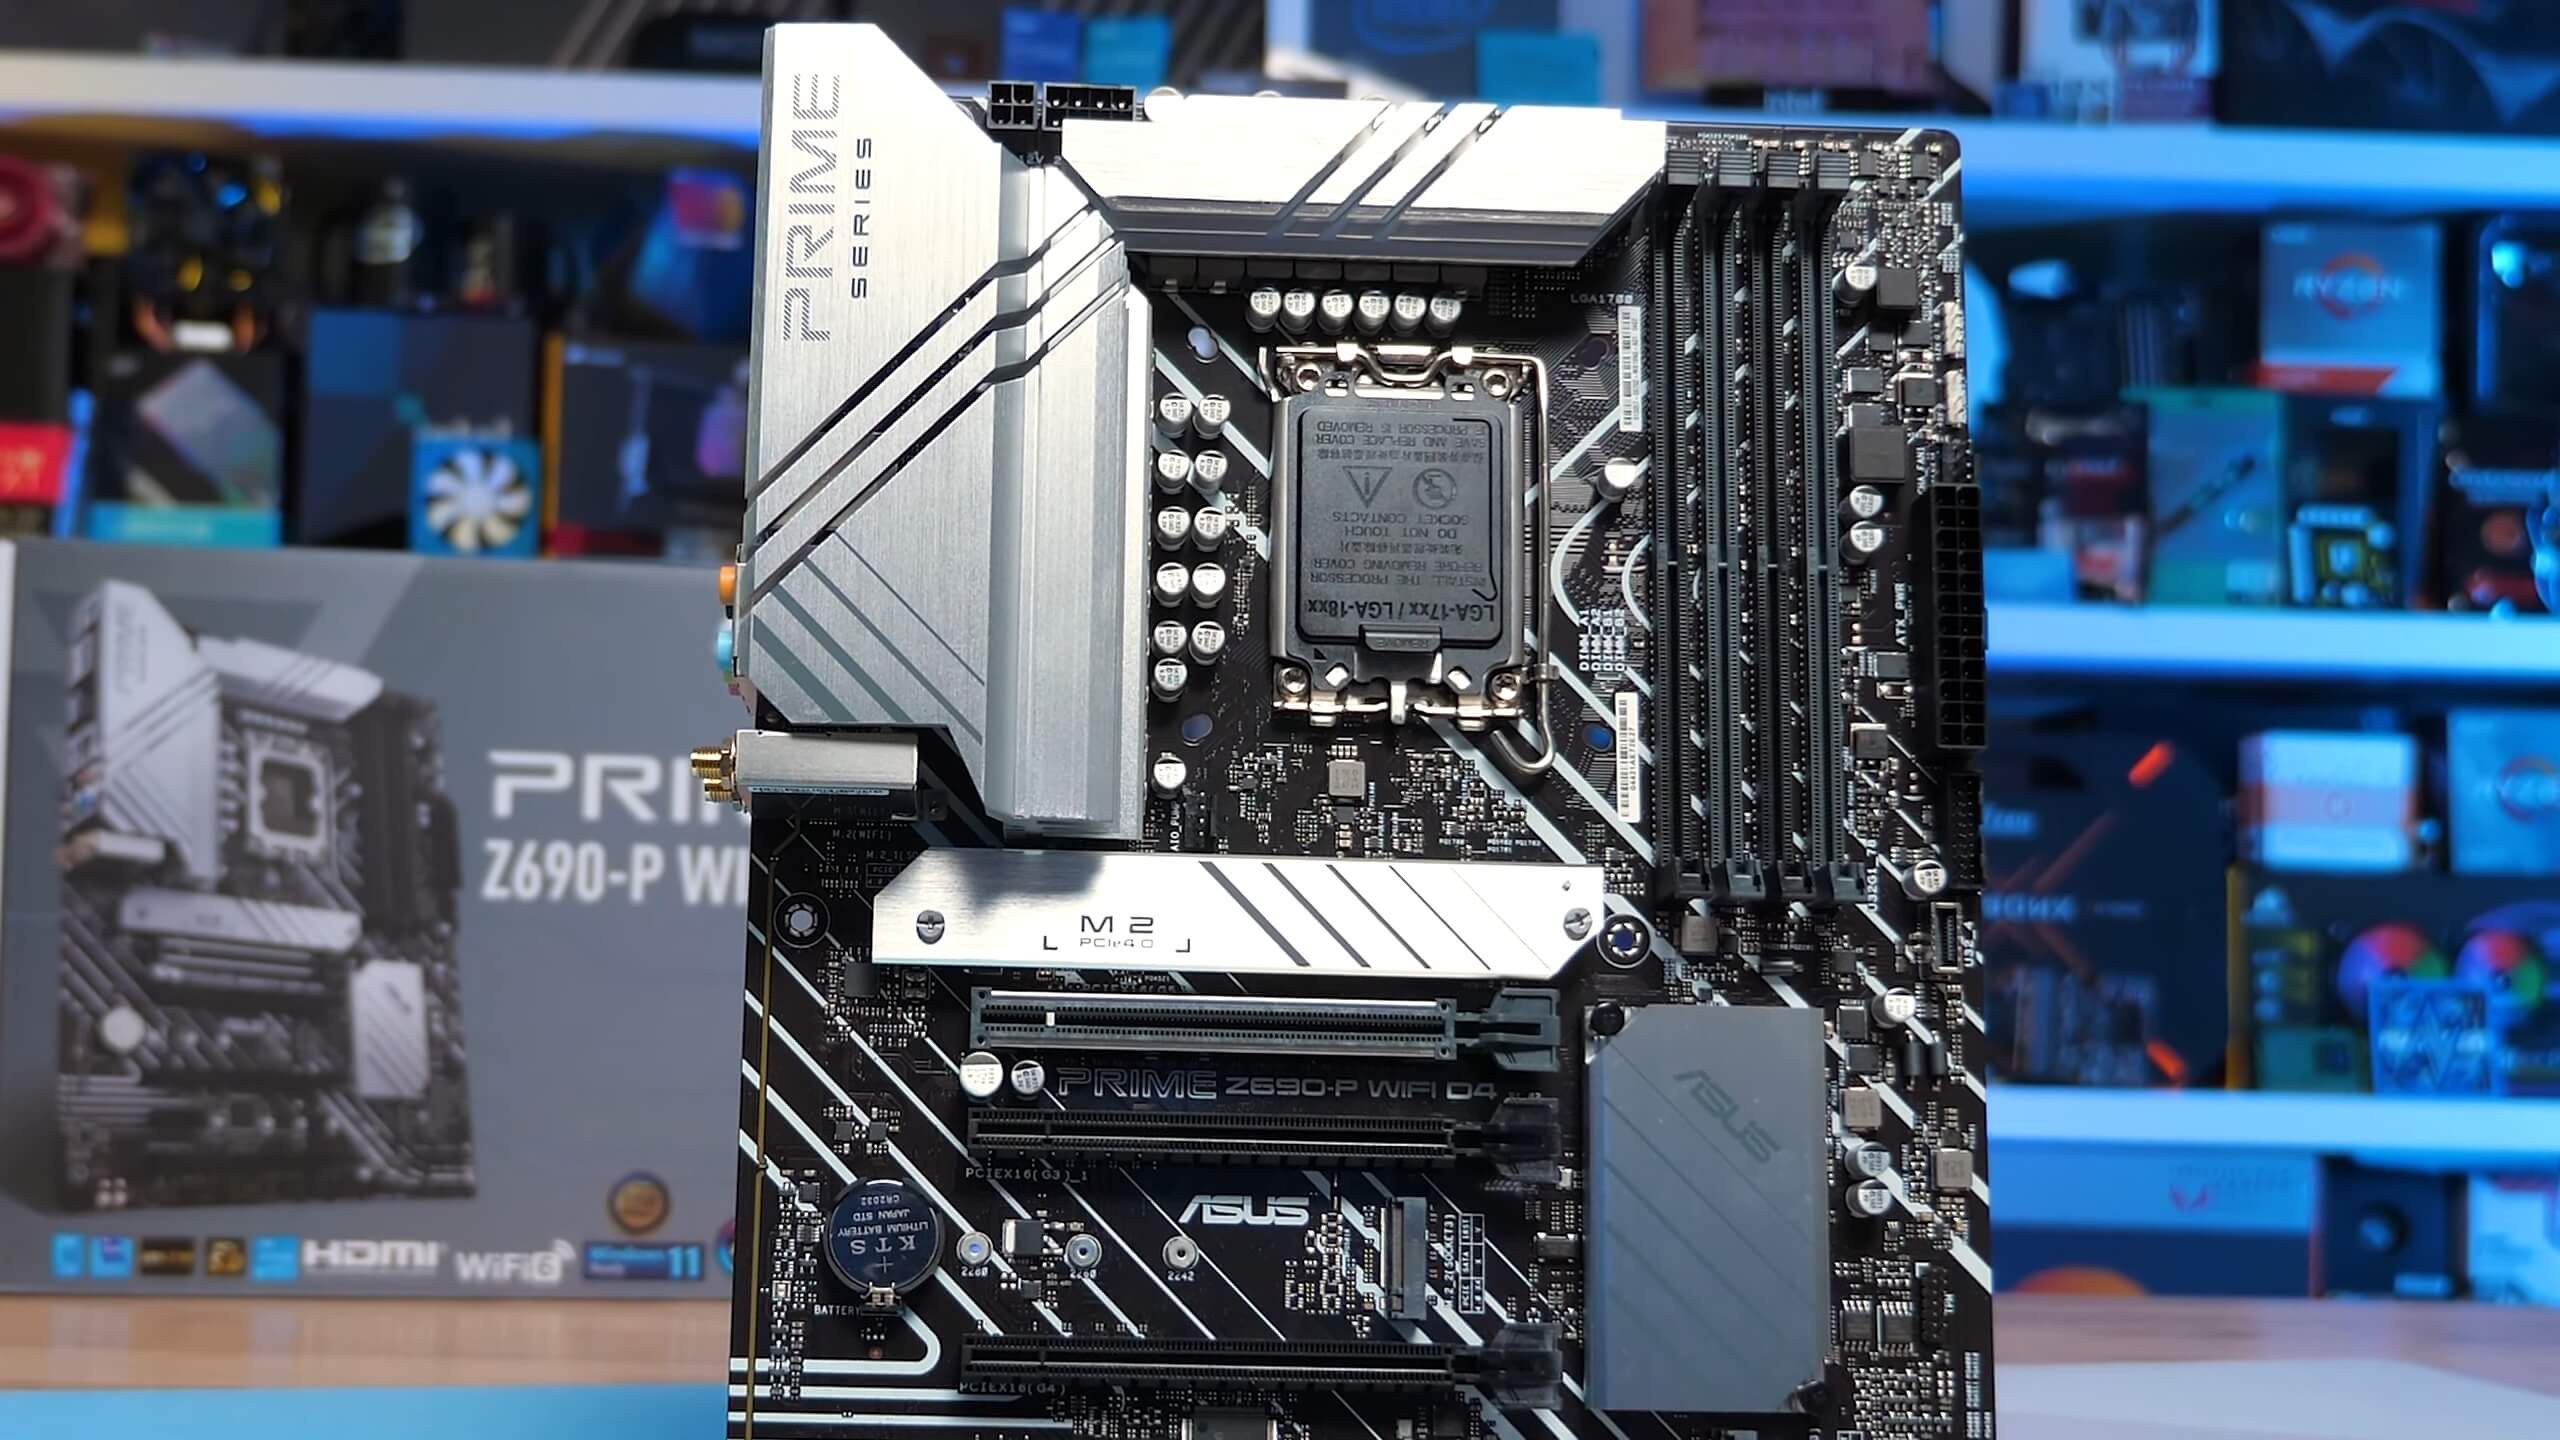 Asus and Gigabyte predict motherboard sales will fall 25% this year as GPU bundles lose appeal